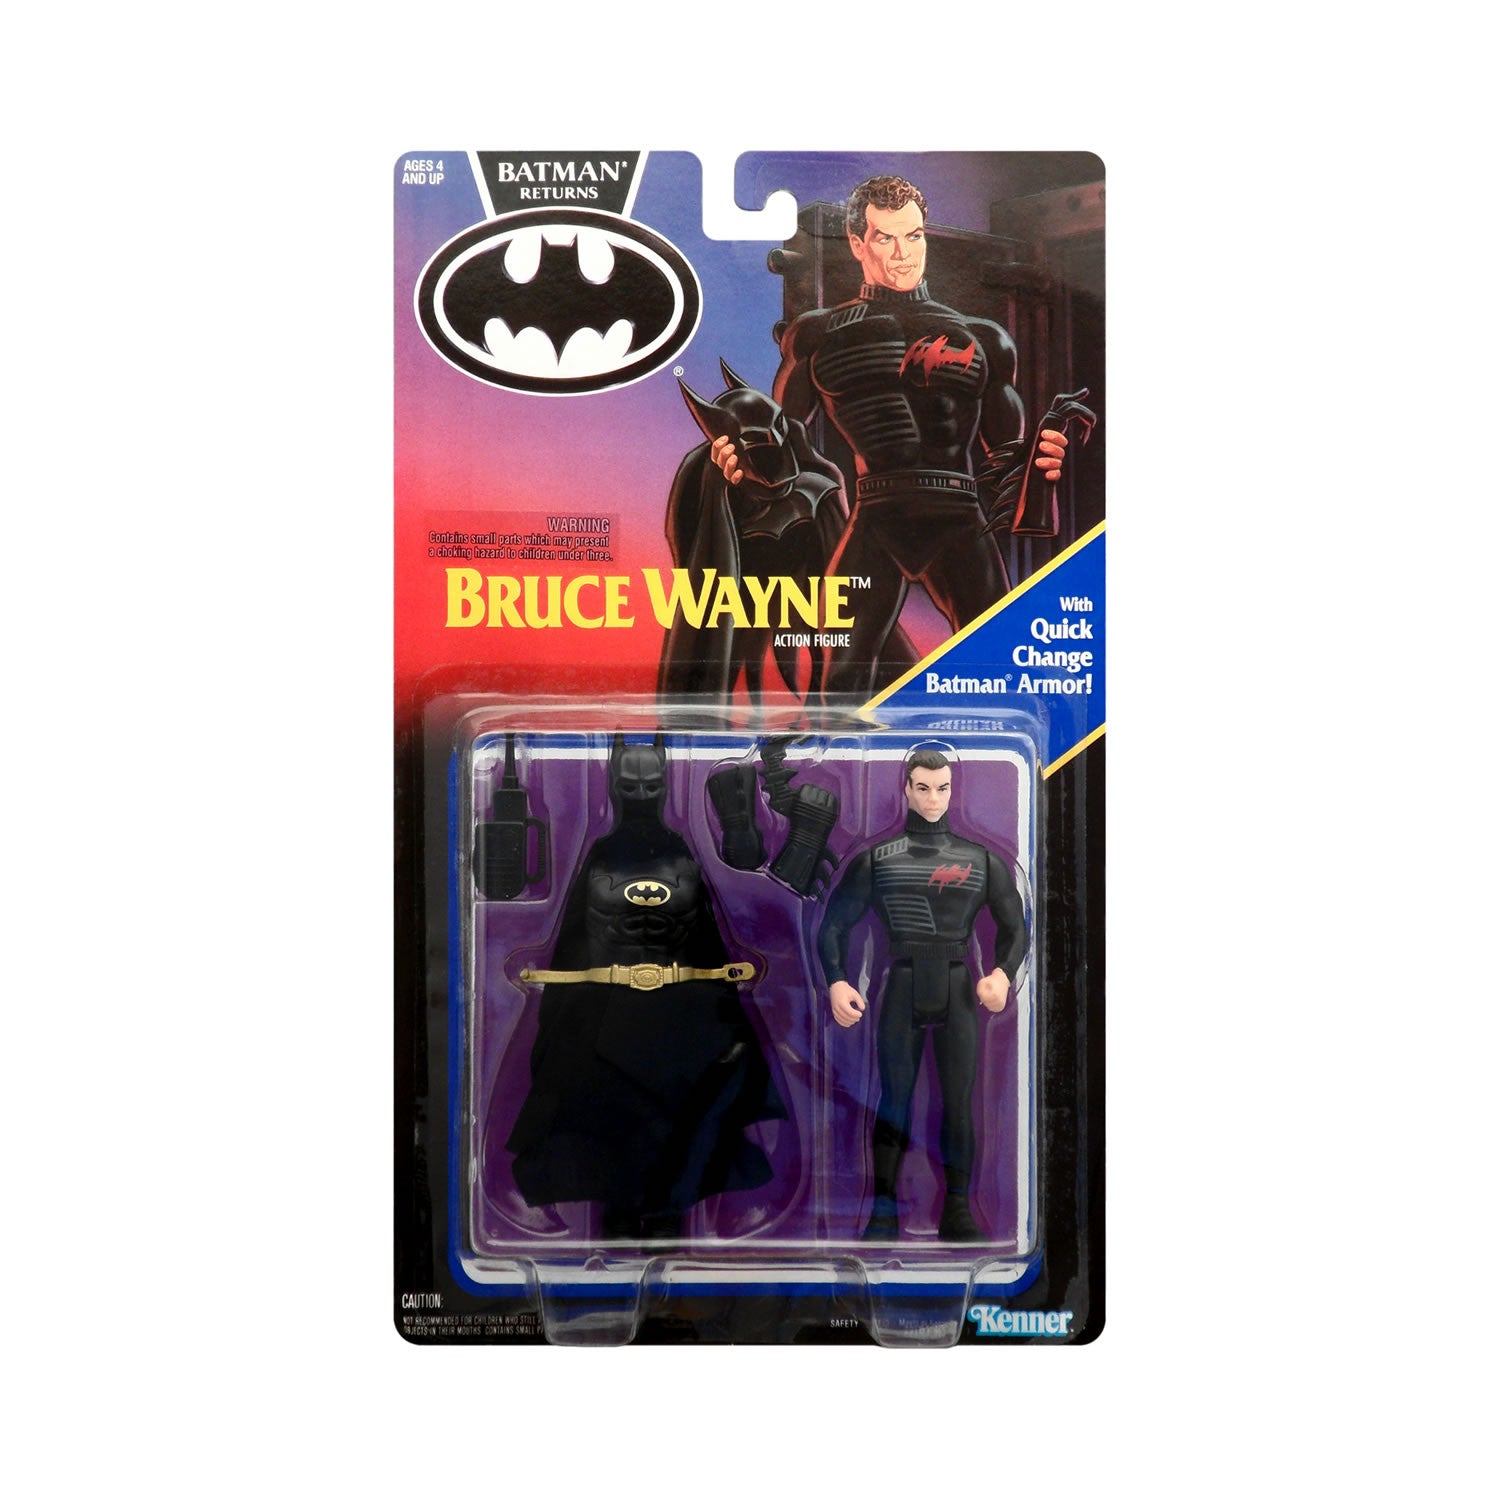 Bruce Wayne Action Figure from Batman Returns – Action Figures and